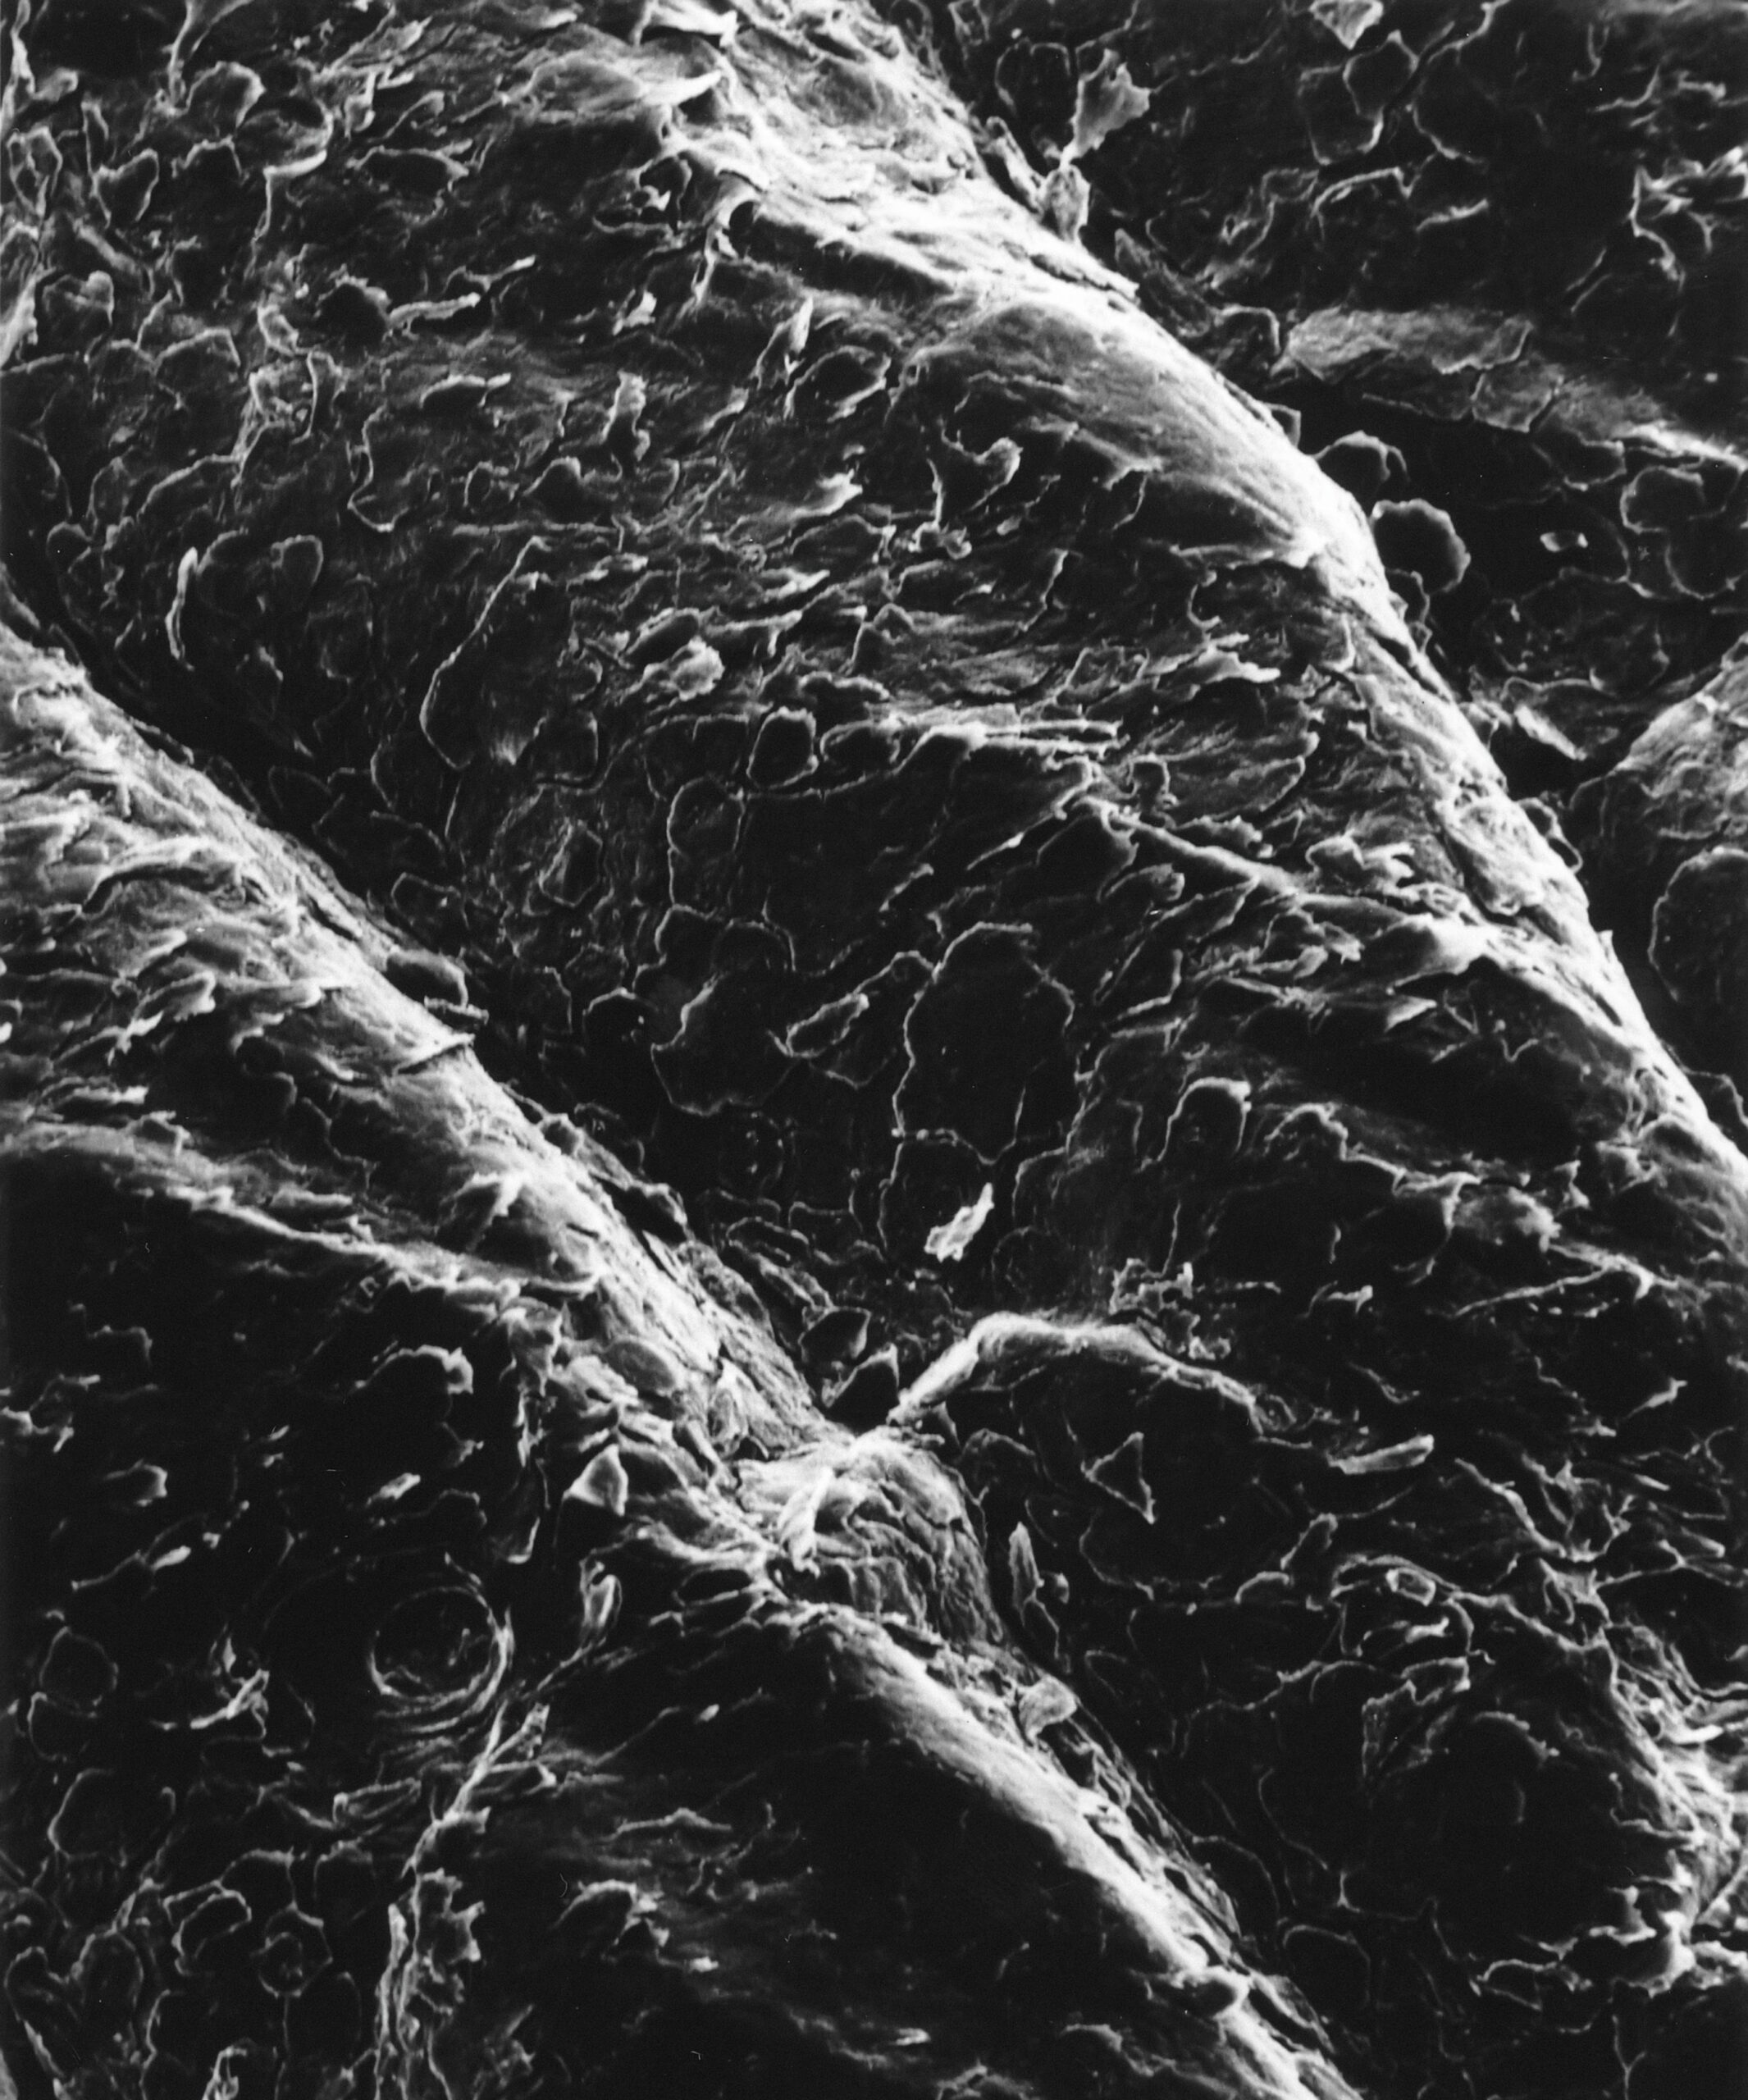 A Scanning Electron Micrograph Of The Surface Of Human Skin